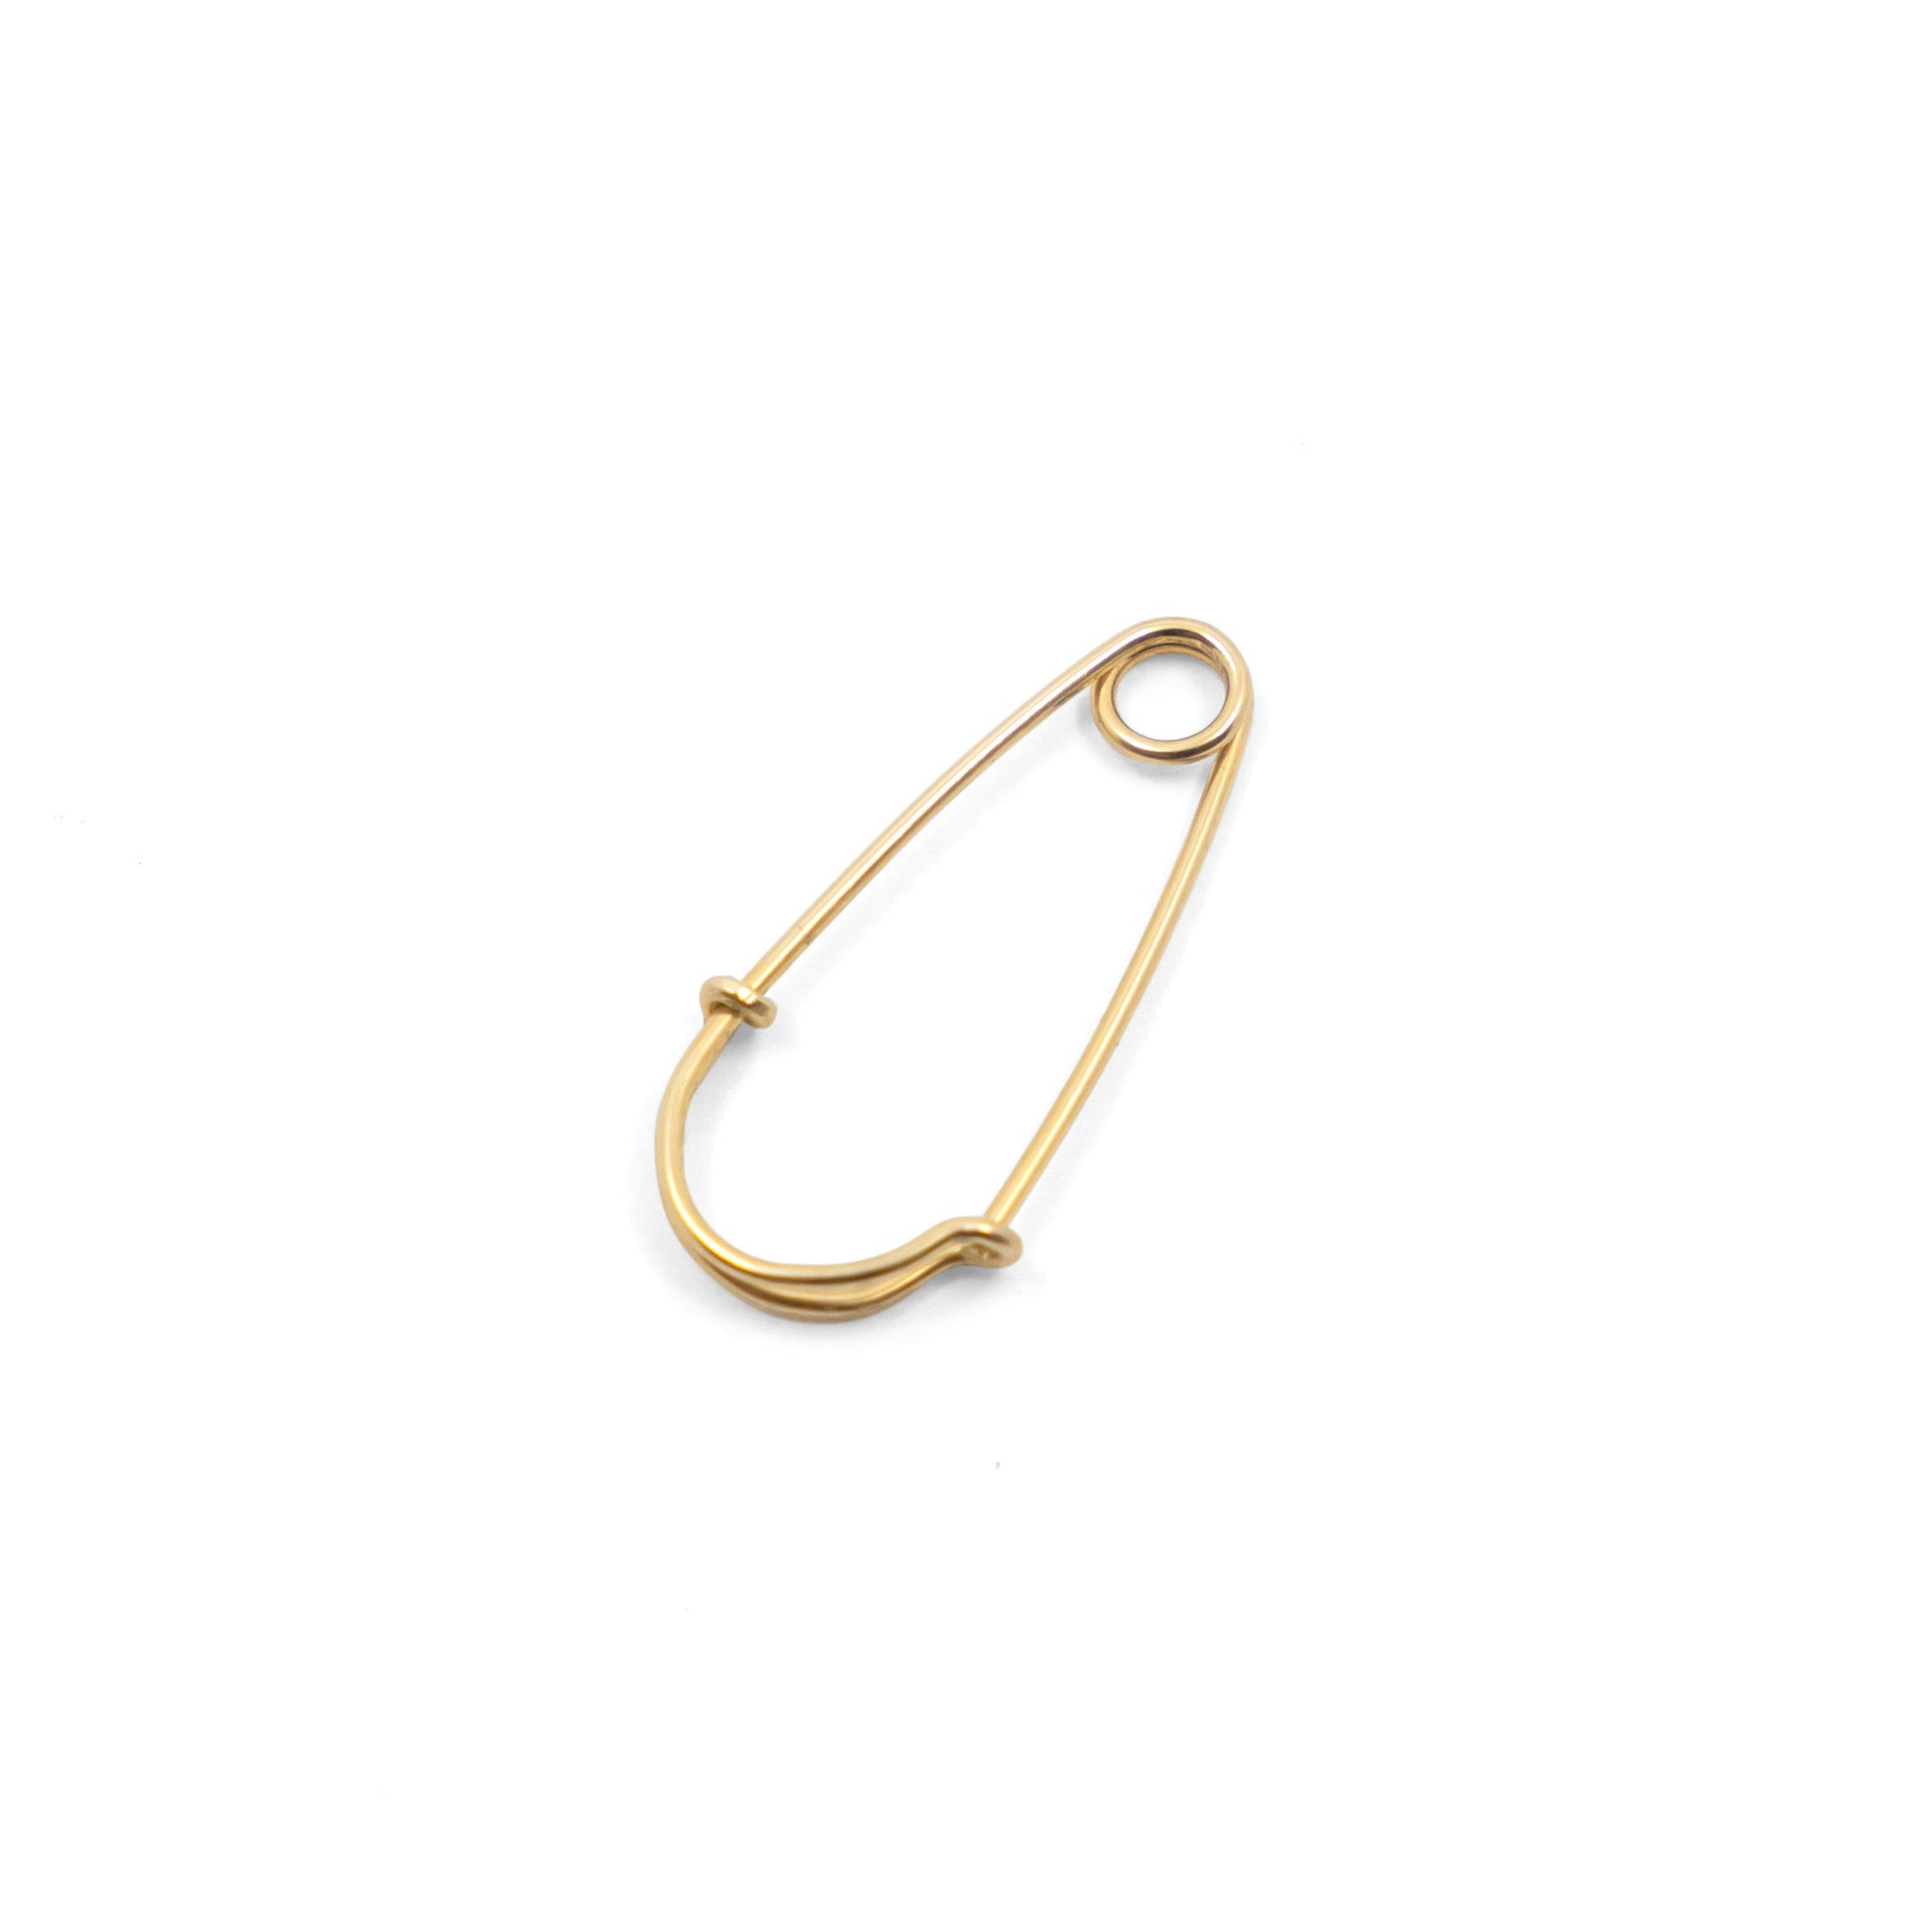 Wire Safety Pin Earring (Coiled) - 14k Yellow Gold